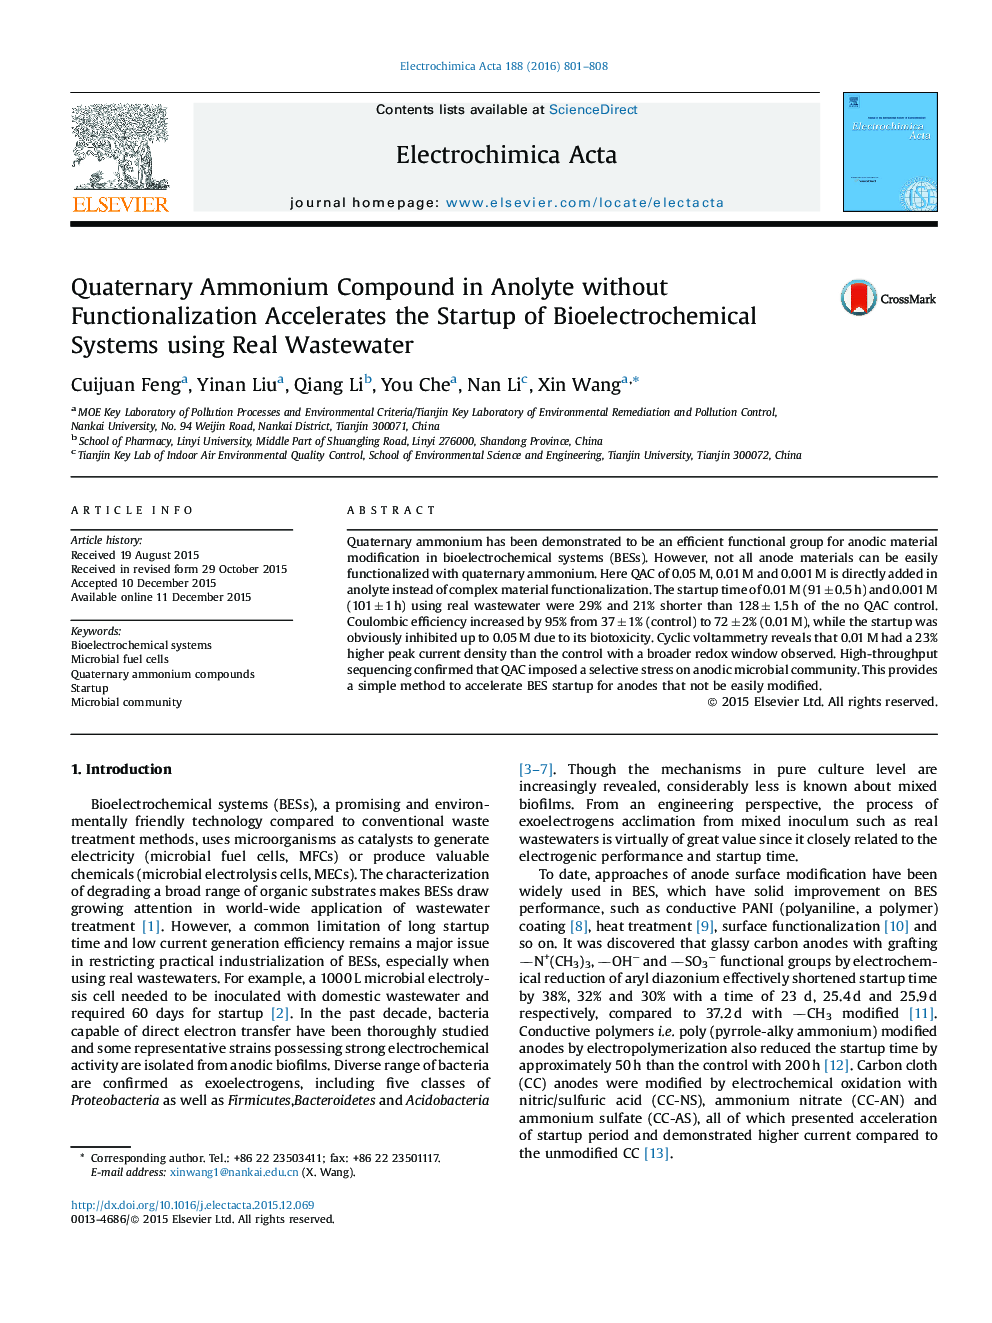 Quaternary Ammonium Compound in Anolyte without Functionalization Accelerates the Startup of Bioelectrochemical Systems using Real Wastewater